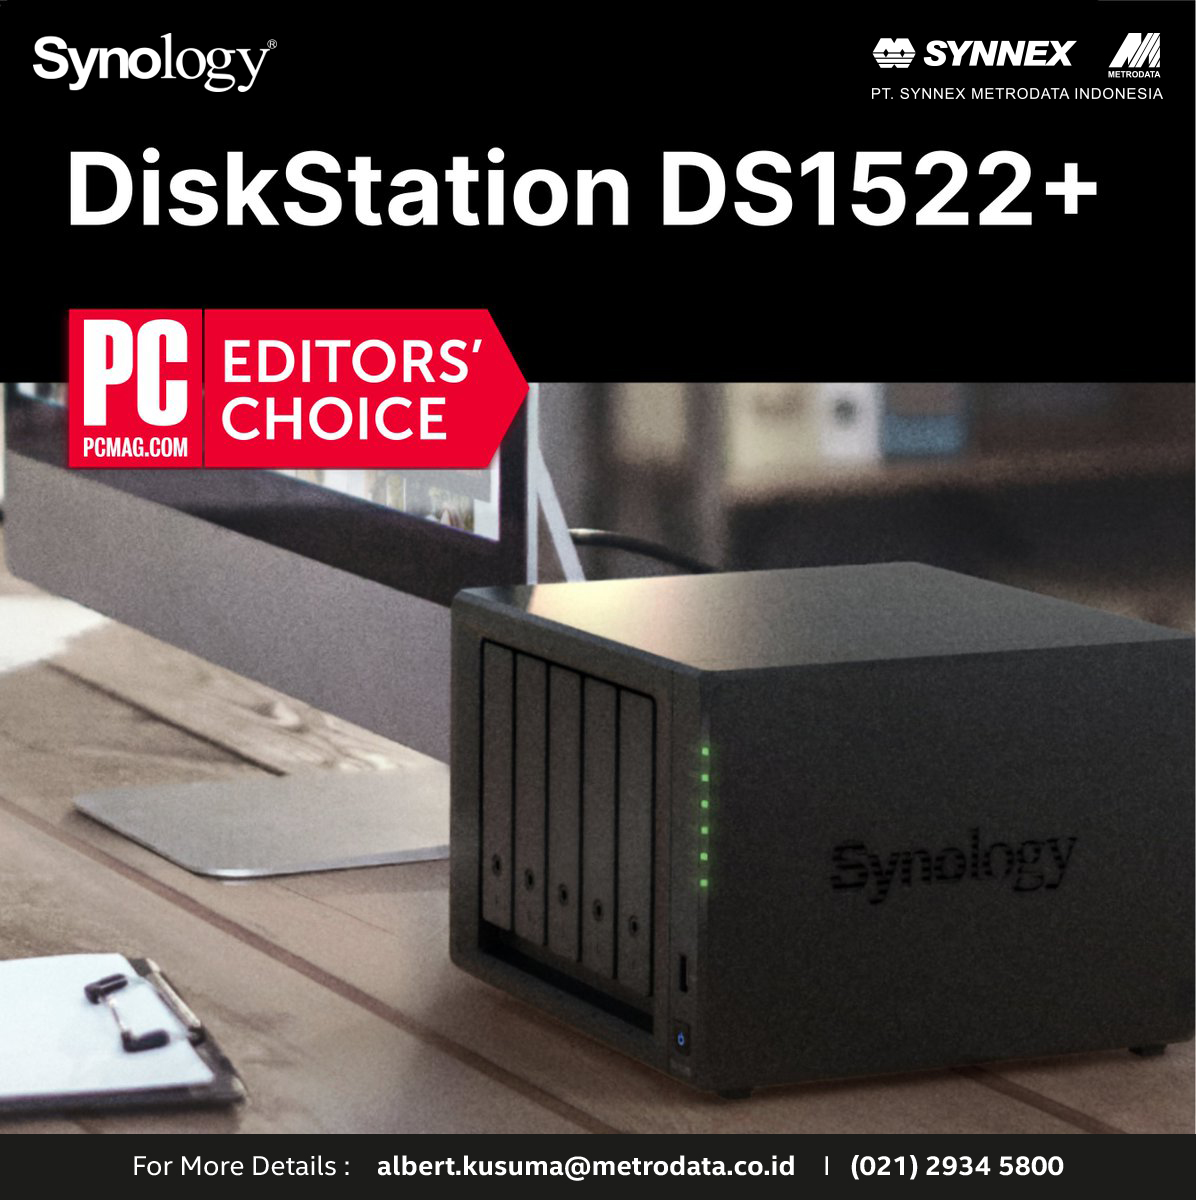 Synology : DiskStation DS1522 - Synnex Metrodata Indonesia